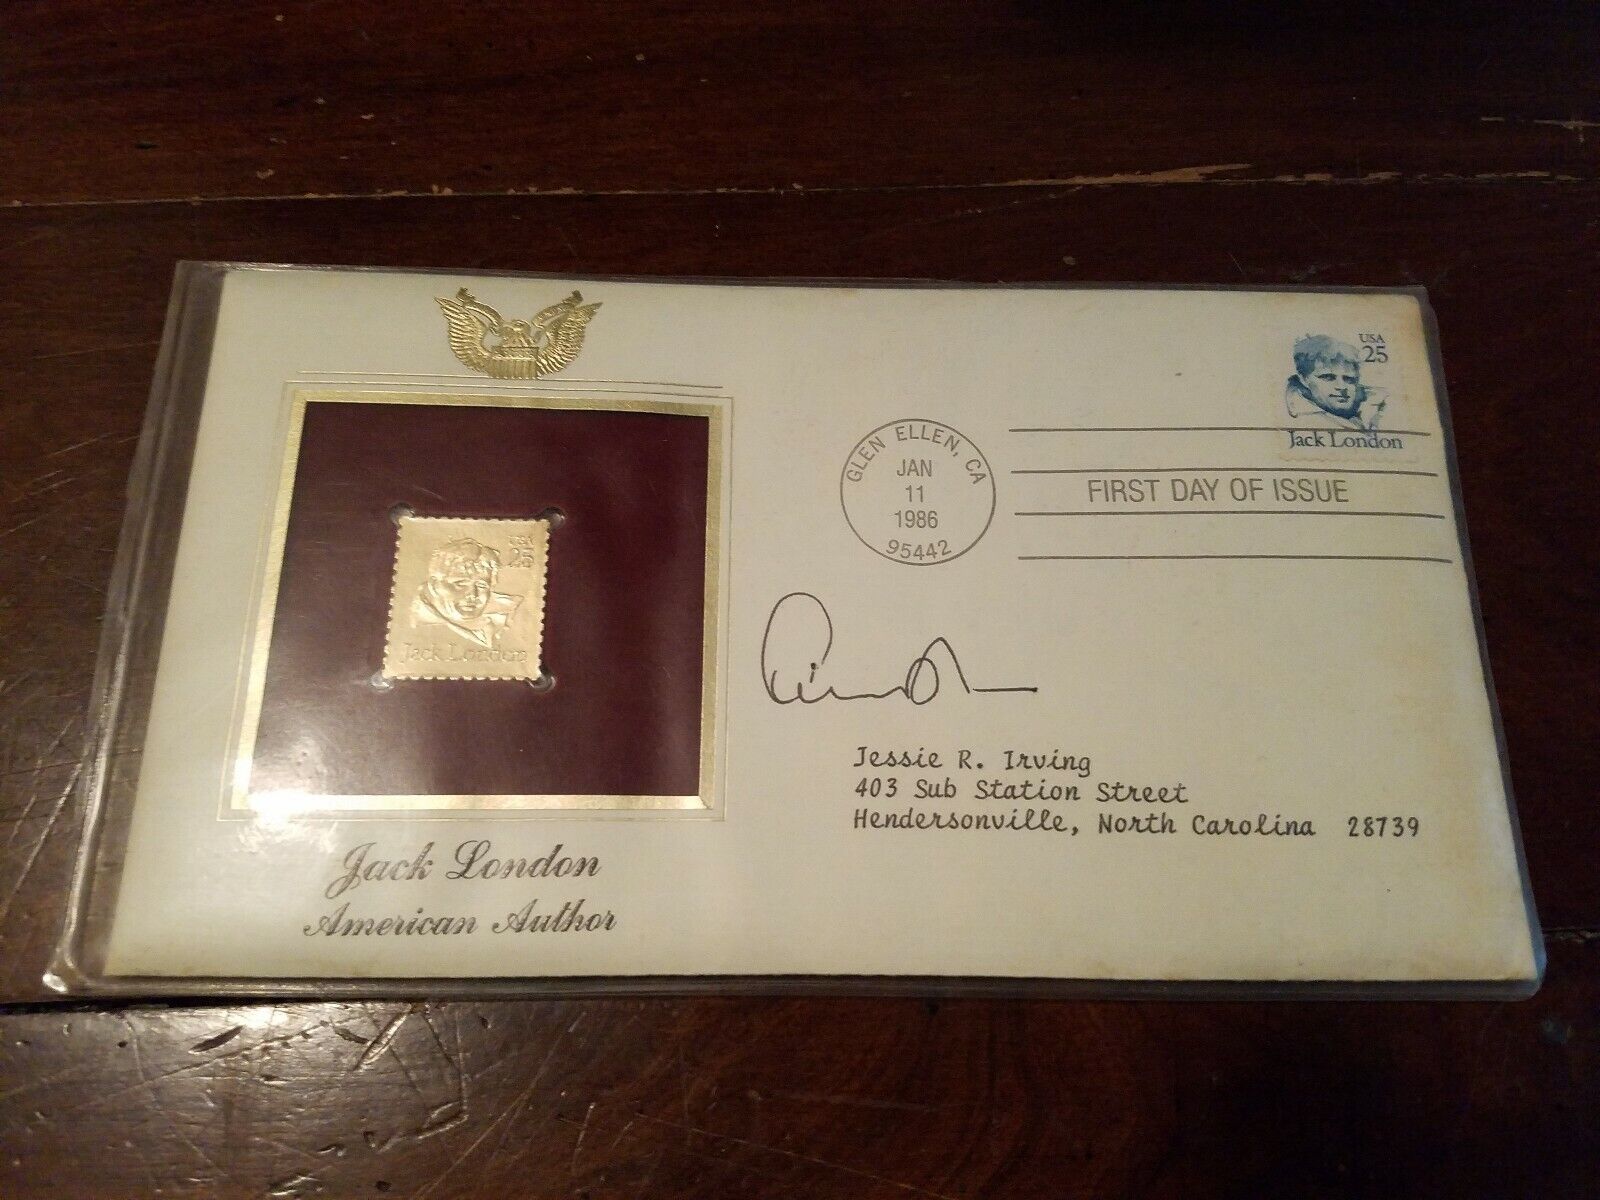 EDWARD ALBEE Signed First Day Cover Tribute Autographed Jack London FDC Jan 1986